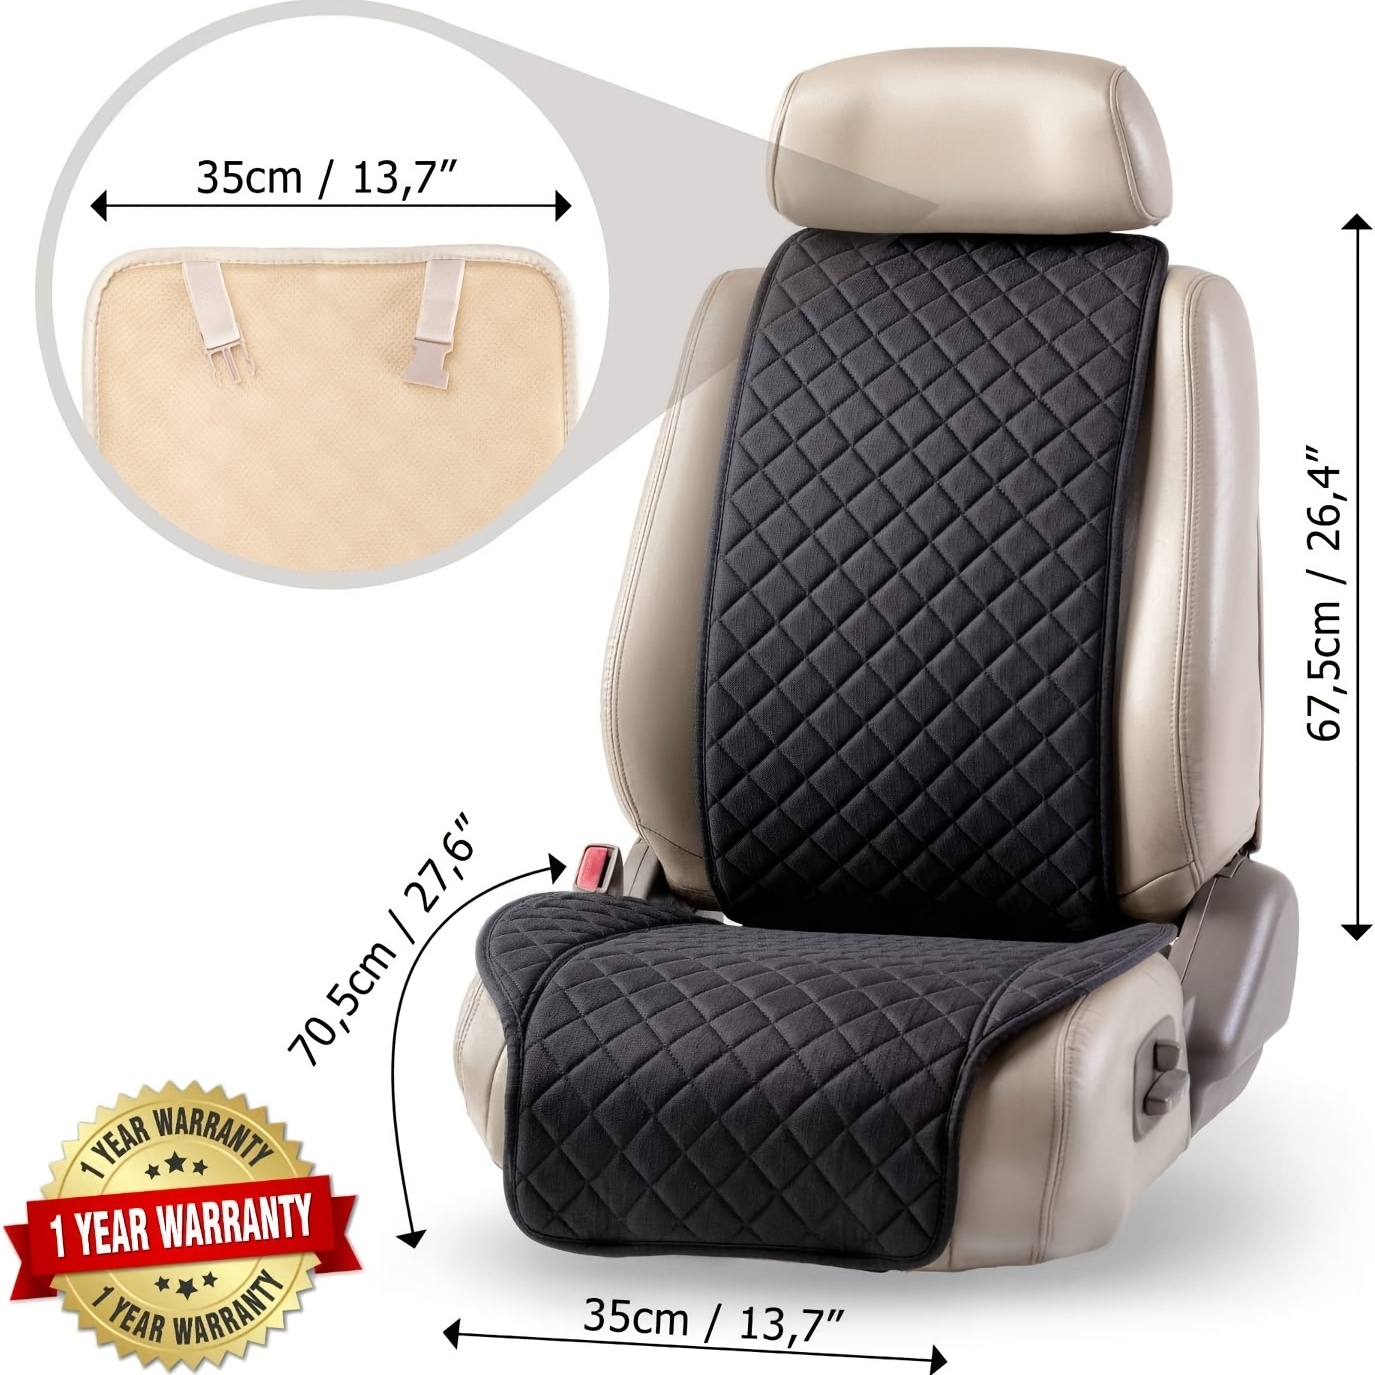 IVICY Linen Car Seat Cover for Cars - Soft & Breathable Front Premium  Covers with Non-Slip Protector Universal Fits Most Automotive, Vans, SUVs